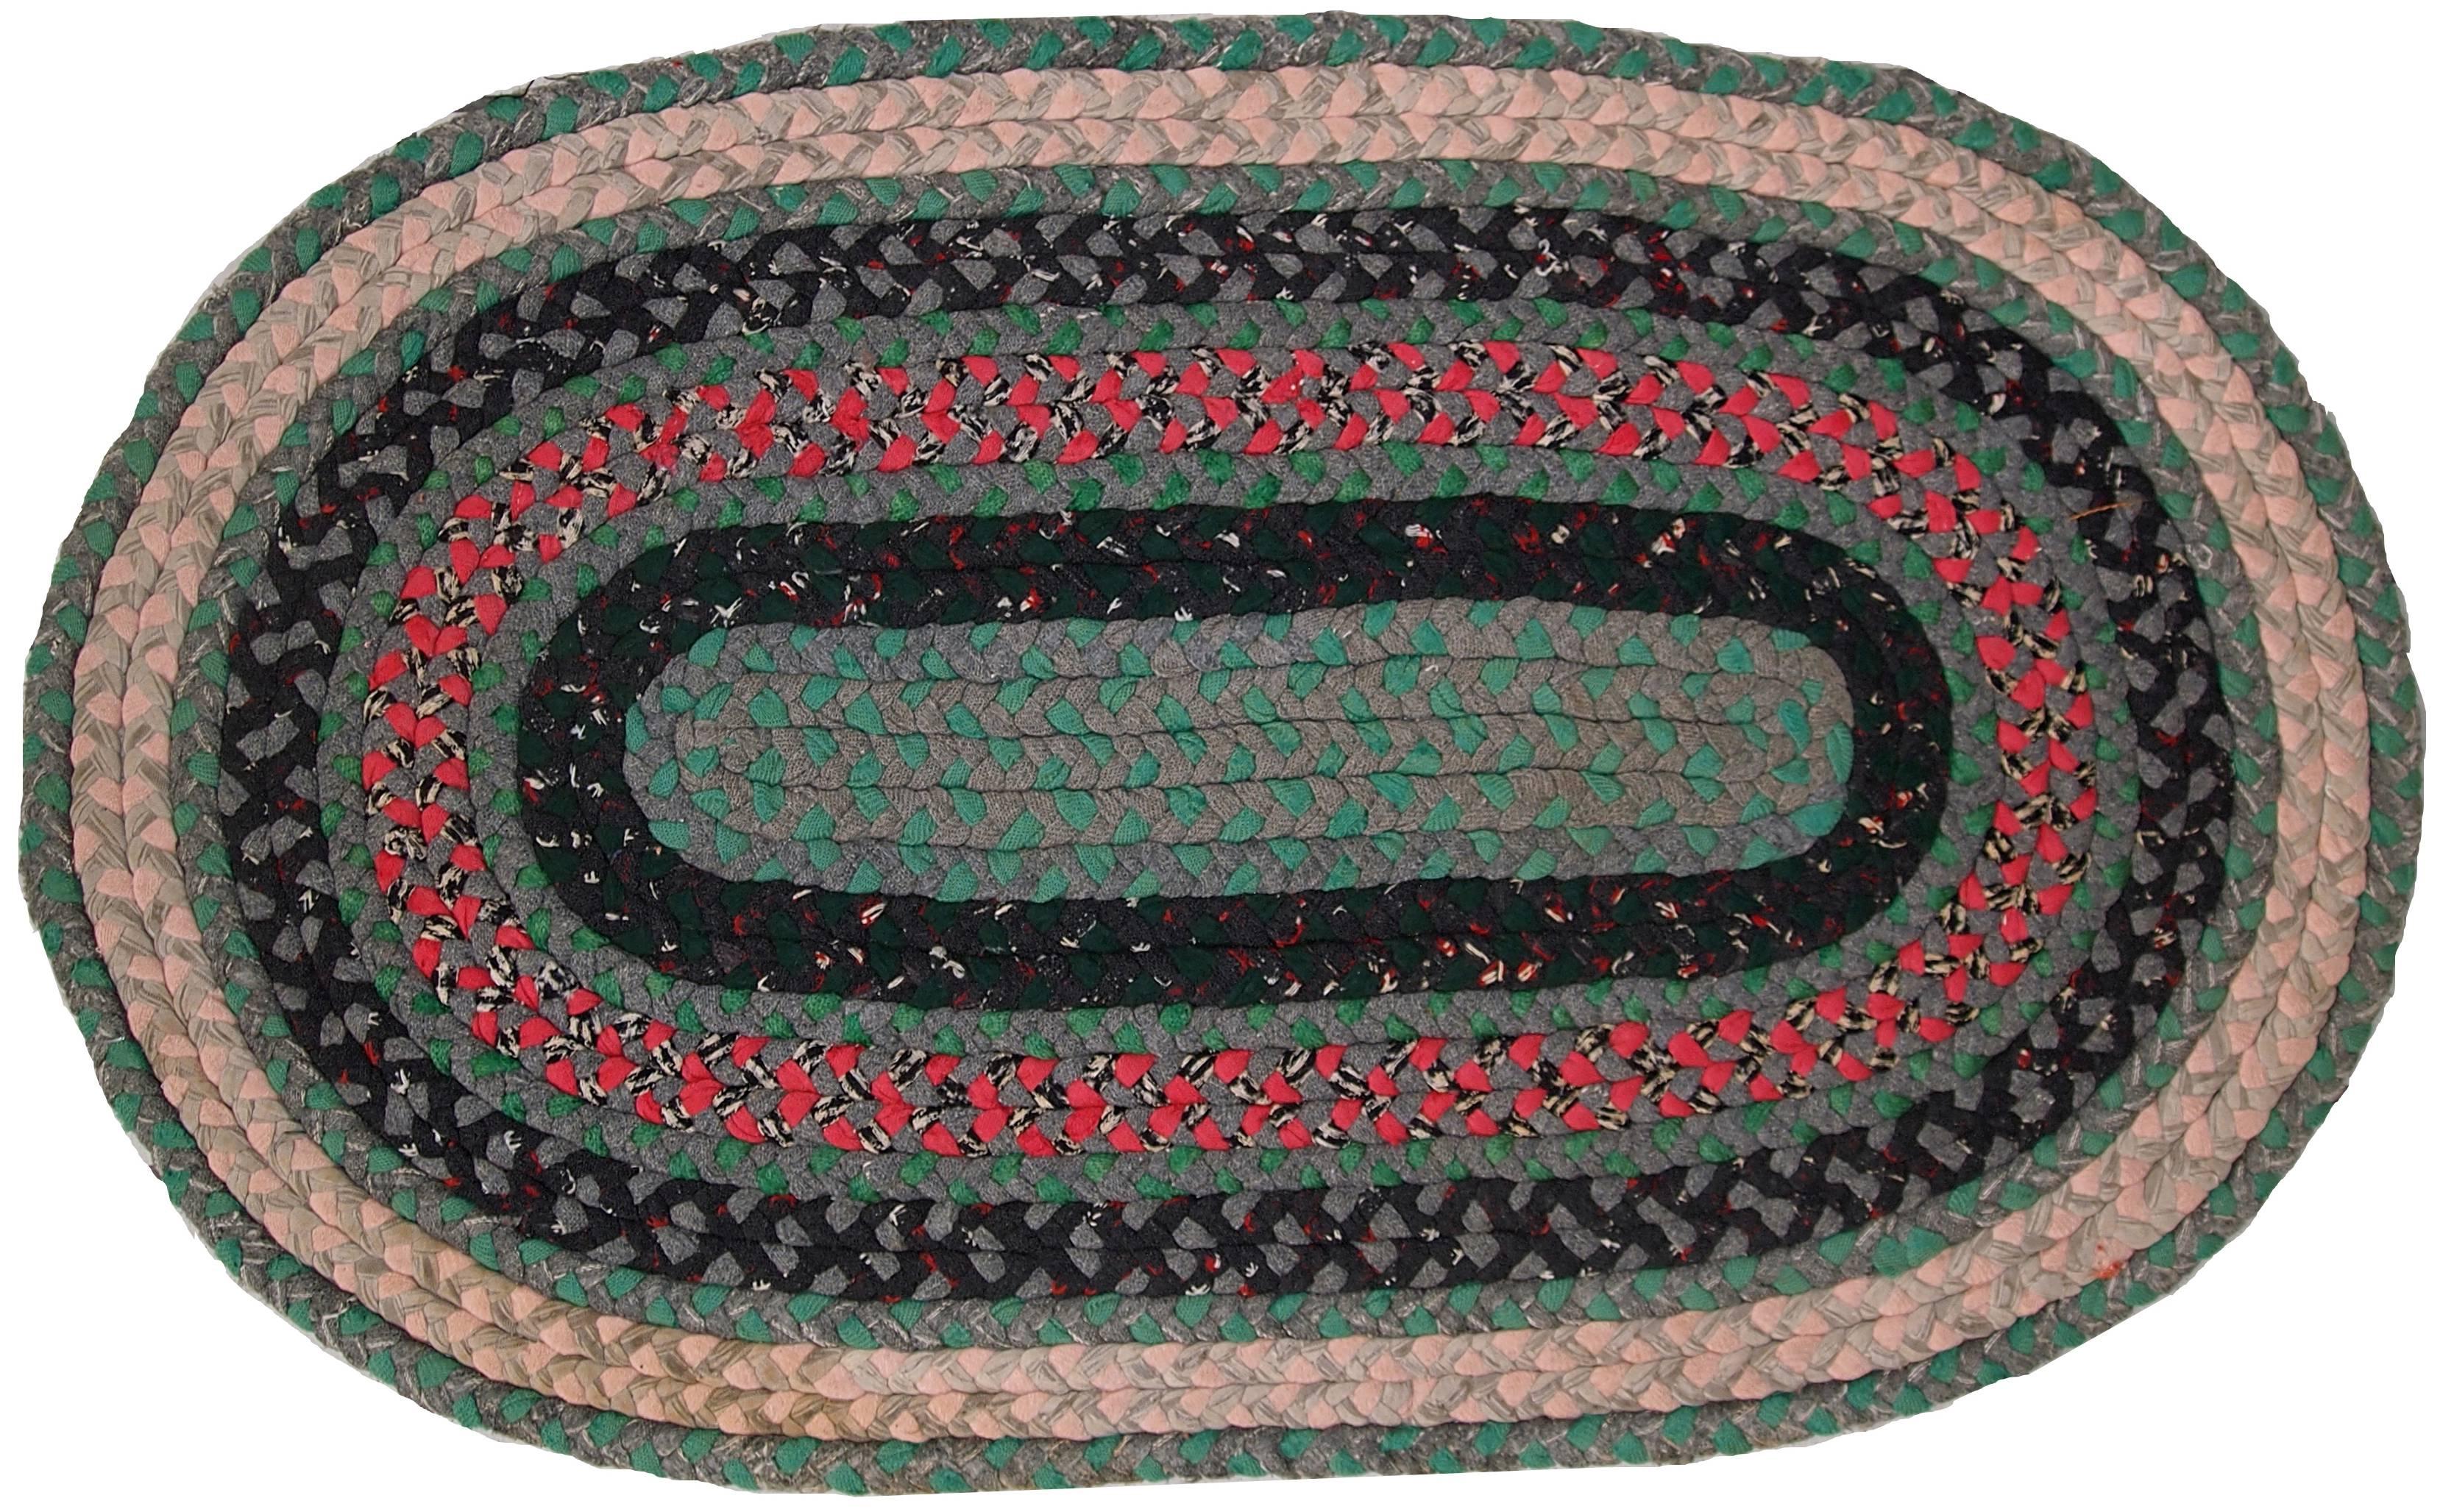 Handmade antique oval American braided cotton rug in green, fuchsia, and beige stripes. The rug is in original good condition.
 